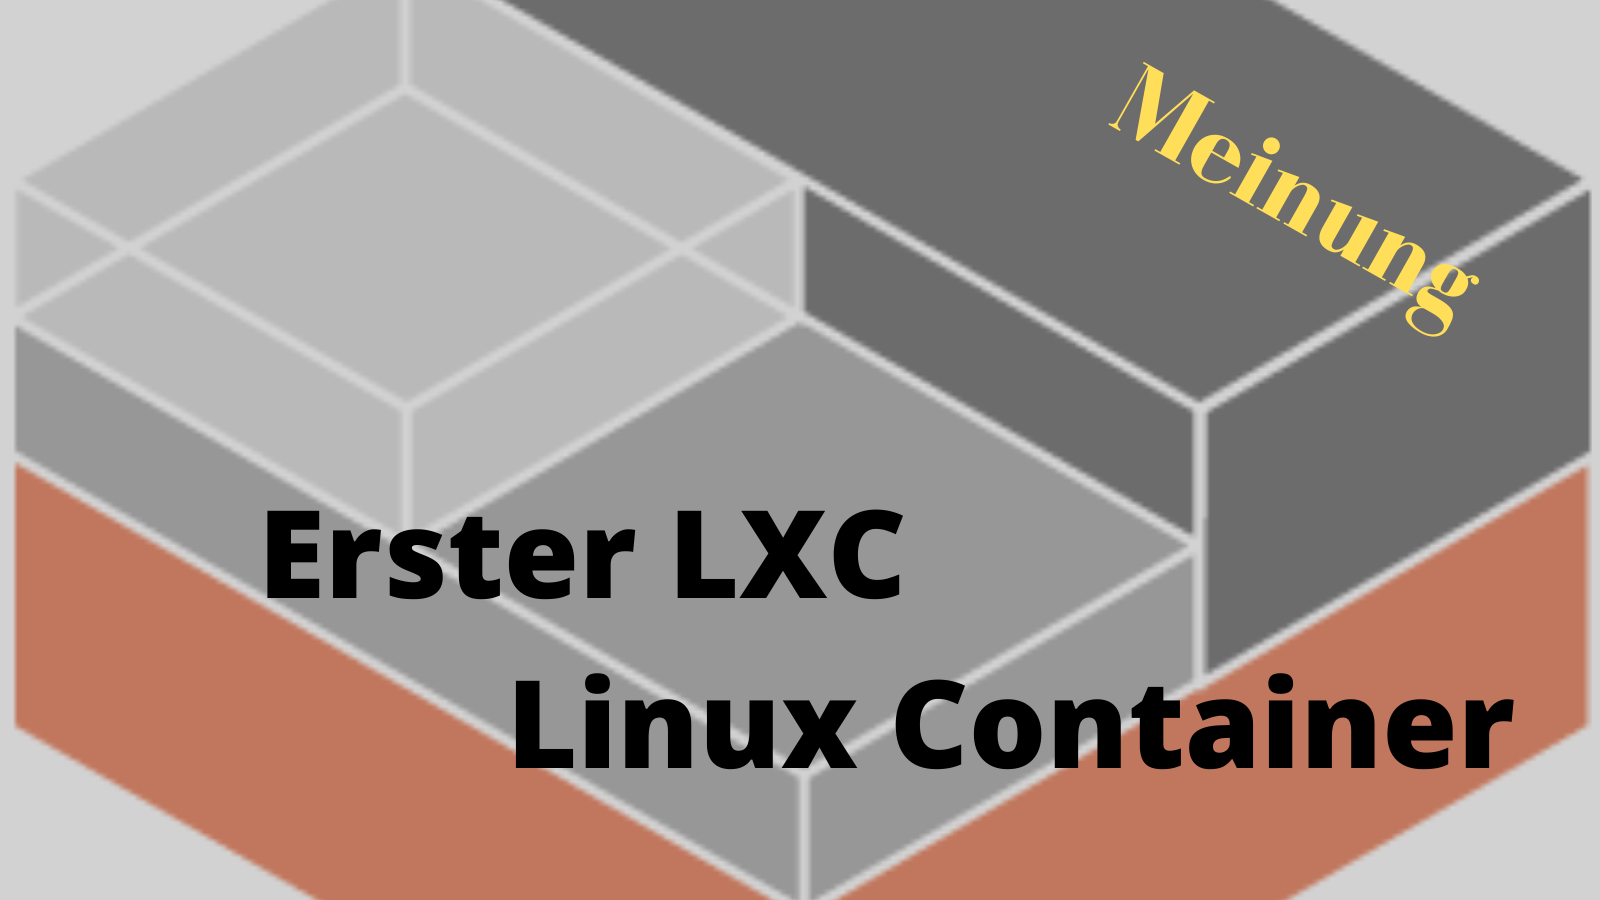 Mein erster LXC – Linux Container